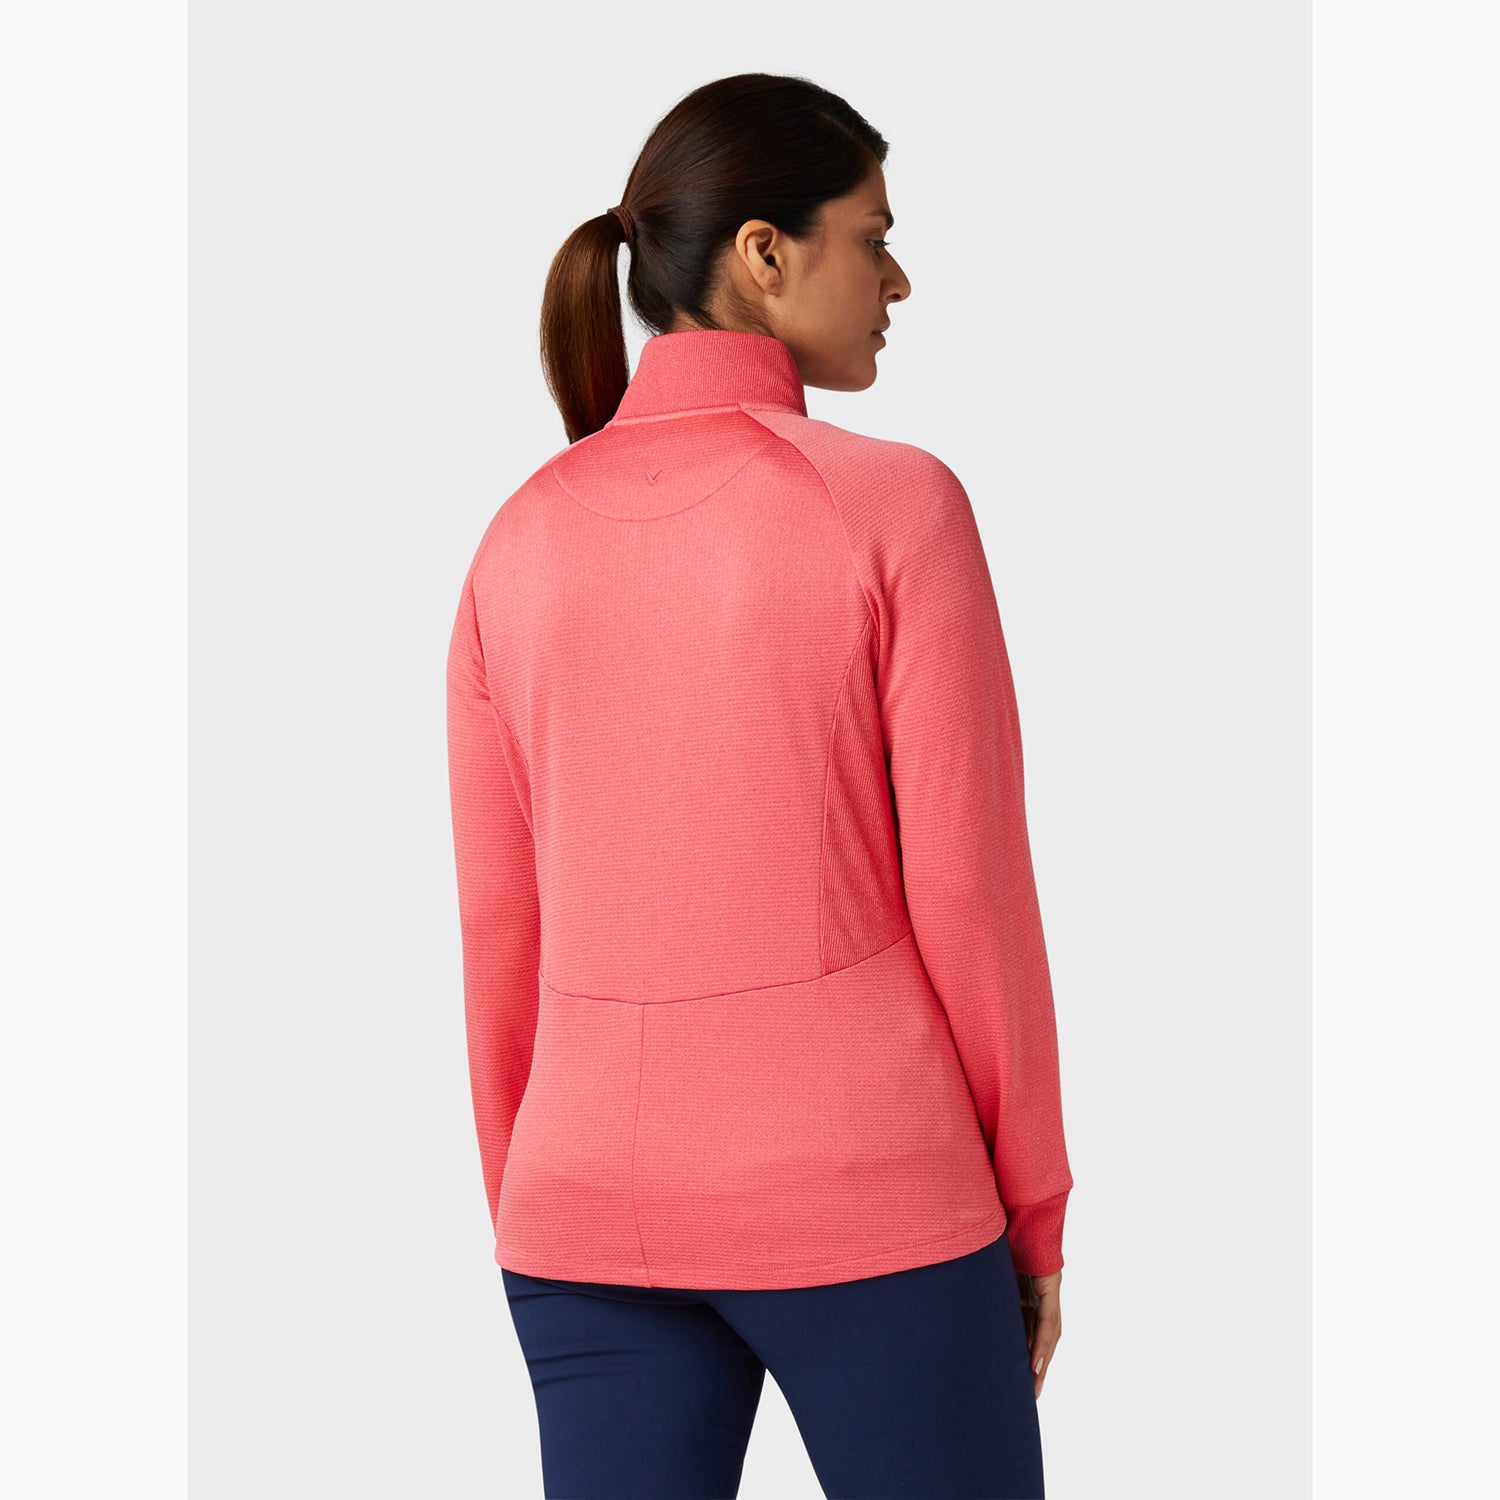 Callaway Ladies Thermal Jersey Knit Jacket in Paradise Pink Heather